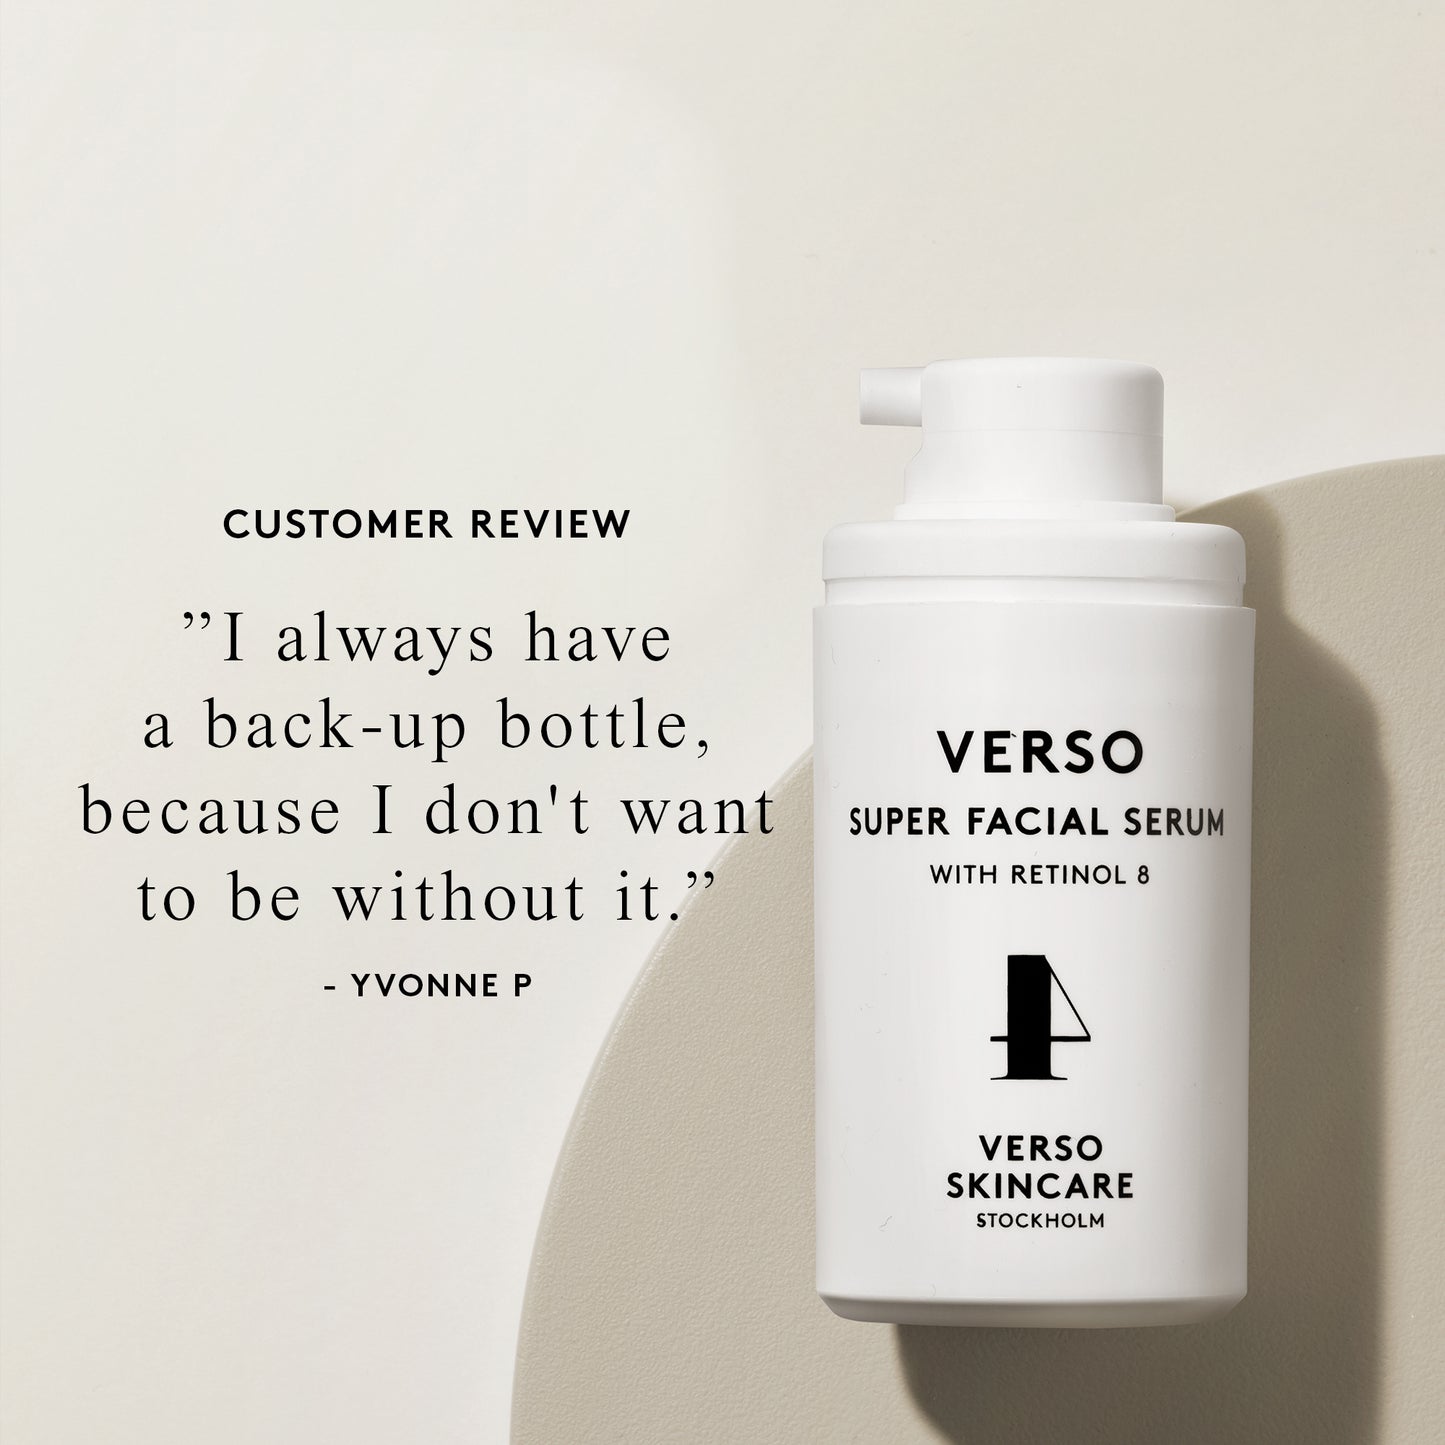 Verso Super Facial Serum: Verso Super Facial Serum is a rich, creamy serum that visibly strengthens and restores the skin. Containing a higher dose of Retinol 8, this face serum effectively promotes the appearance of fresh, youthful skin while visibly improving the skin's texture. The result includes a reduced appearance of wrinkles and discoloration.